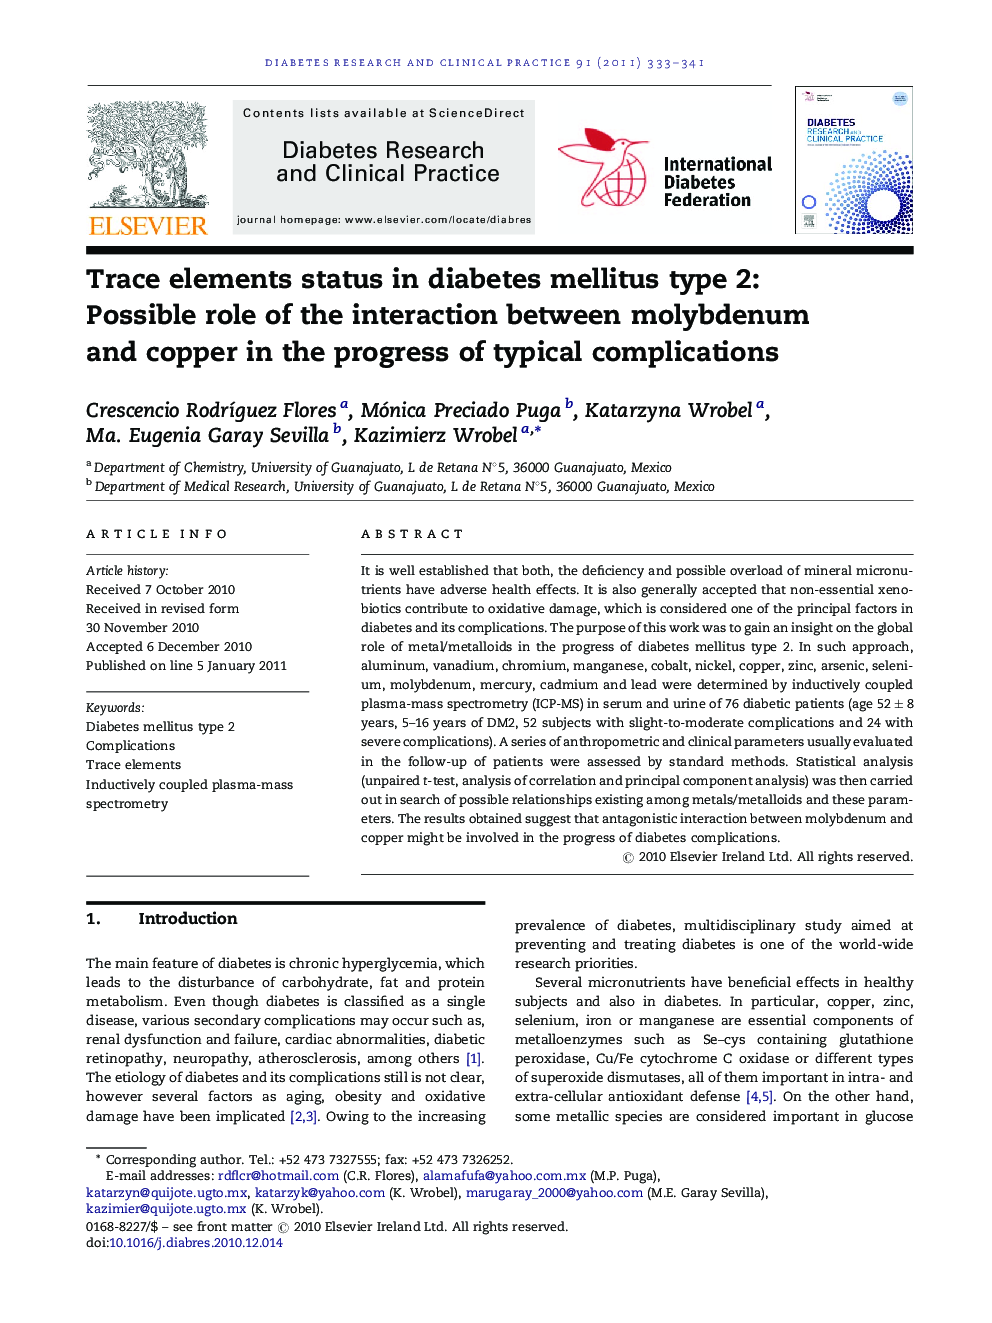 Trace elements status in diabetes mellitus type 2: Possible role of the interaction between molybdenum and copper in the progress of typical complications